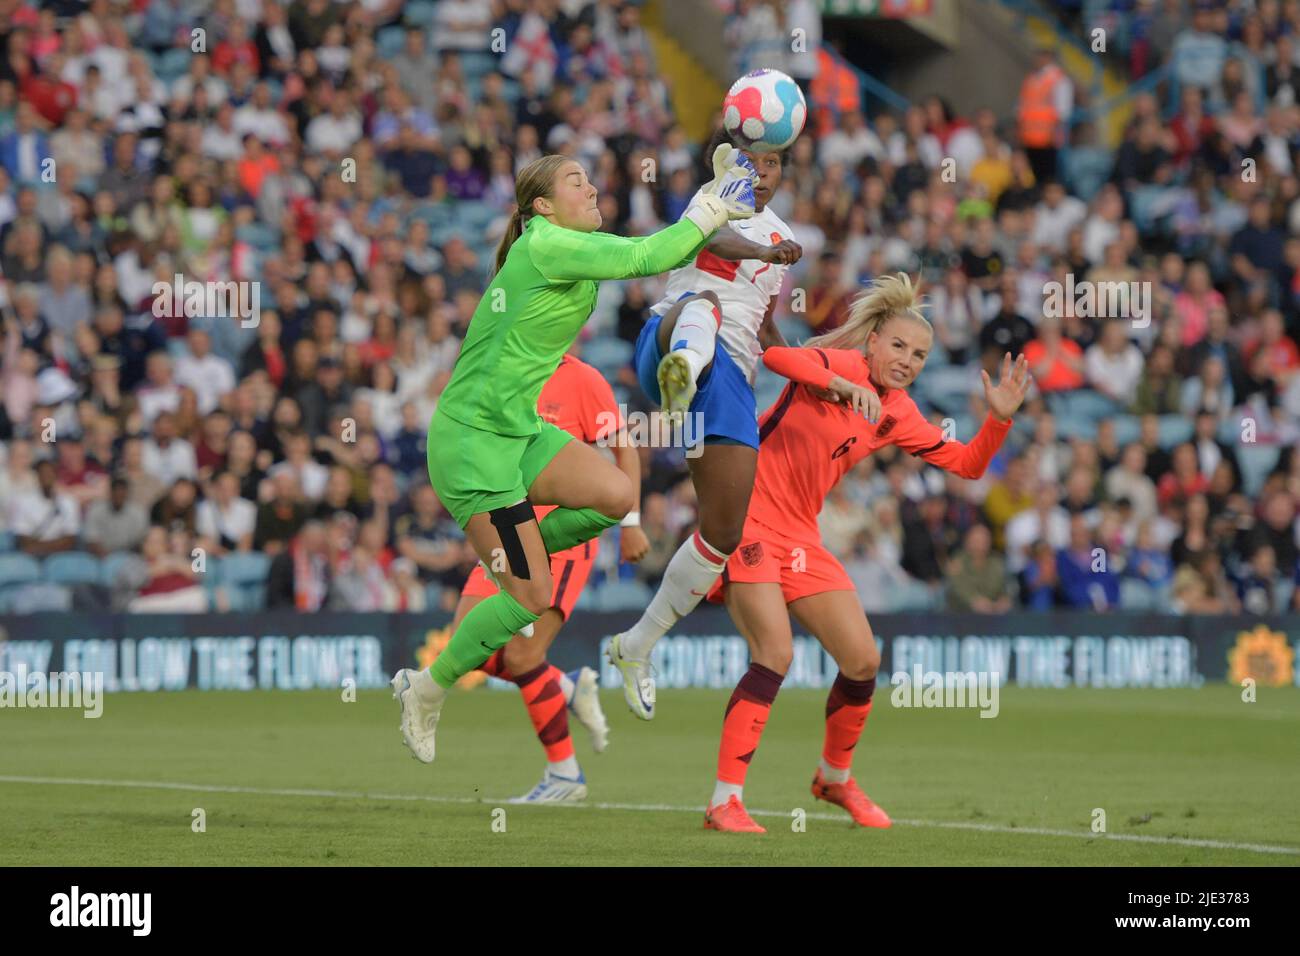 Leeds, UK. 24th June, 2022. LEEDS, UK. JUN 24TH England's Mary Earps bravely come out for the. Ball while under pressure from Netherland's Lineth Beerensteyn during the International Friendly match between England Women and Netherlands at Elland Road, Leeds on Friday 24th June 2022. (Credit: Scott Llewellyn | MI News) Credit: MI News & Sport /Alamy Live News Stock Photo